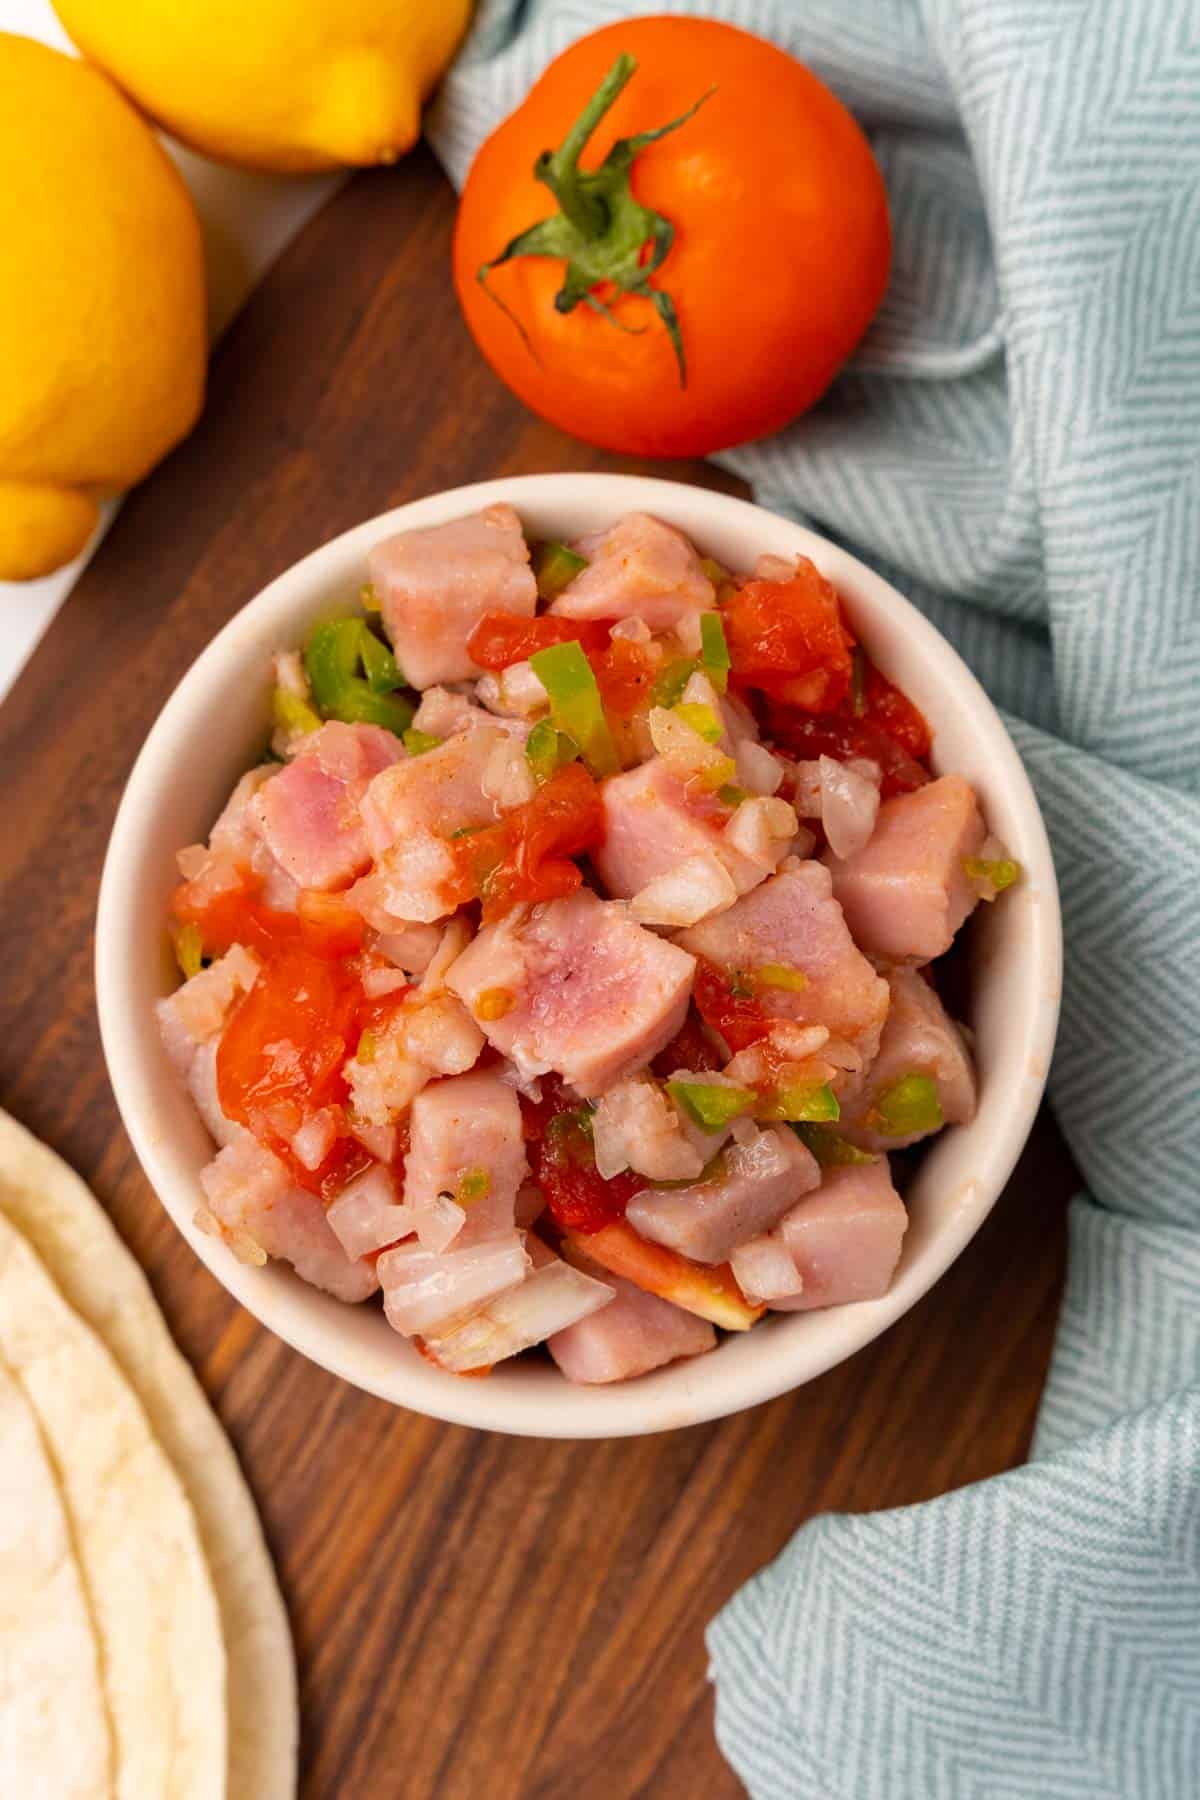 Ceviche in a white bowl as seen from above on a wooden serving board next to a blue cloth napkin and a tomato